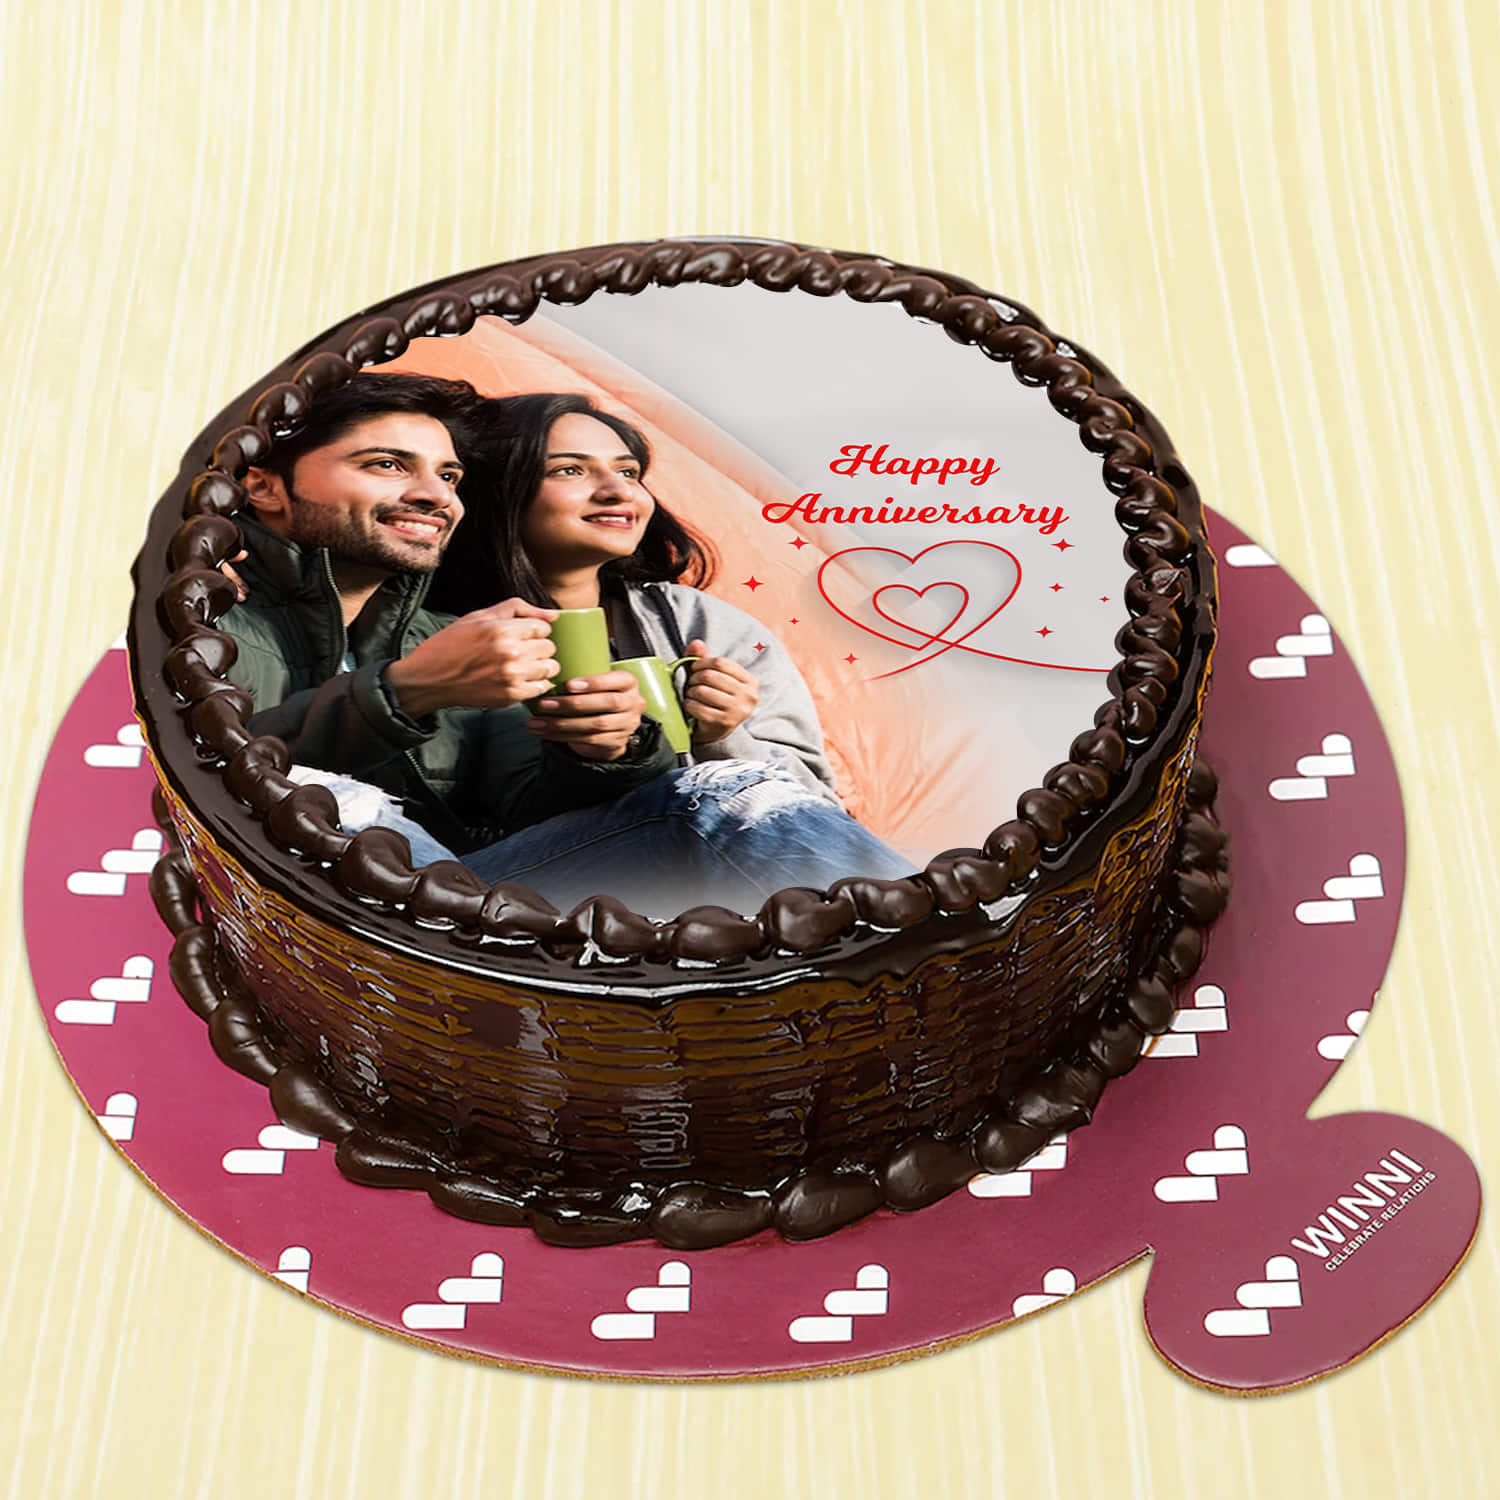 Happy 25th Anniversary Cake Topper 25CT0025  Cake Toppers India